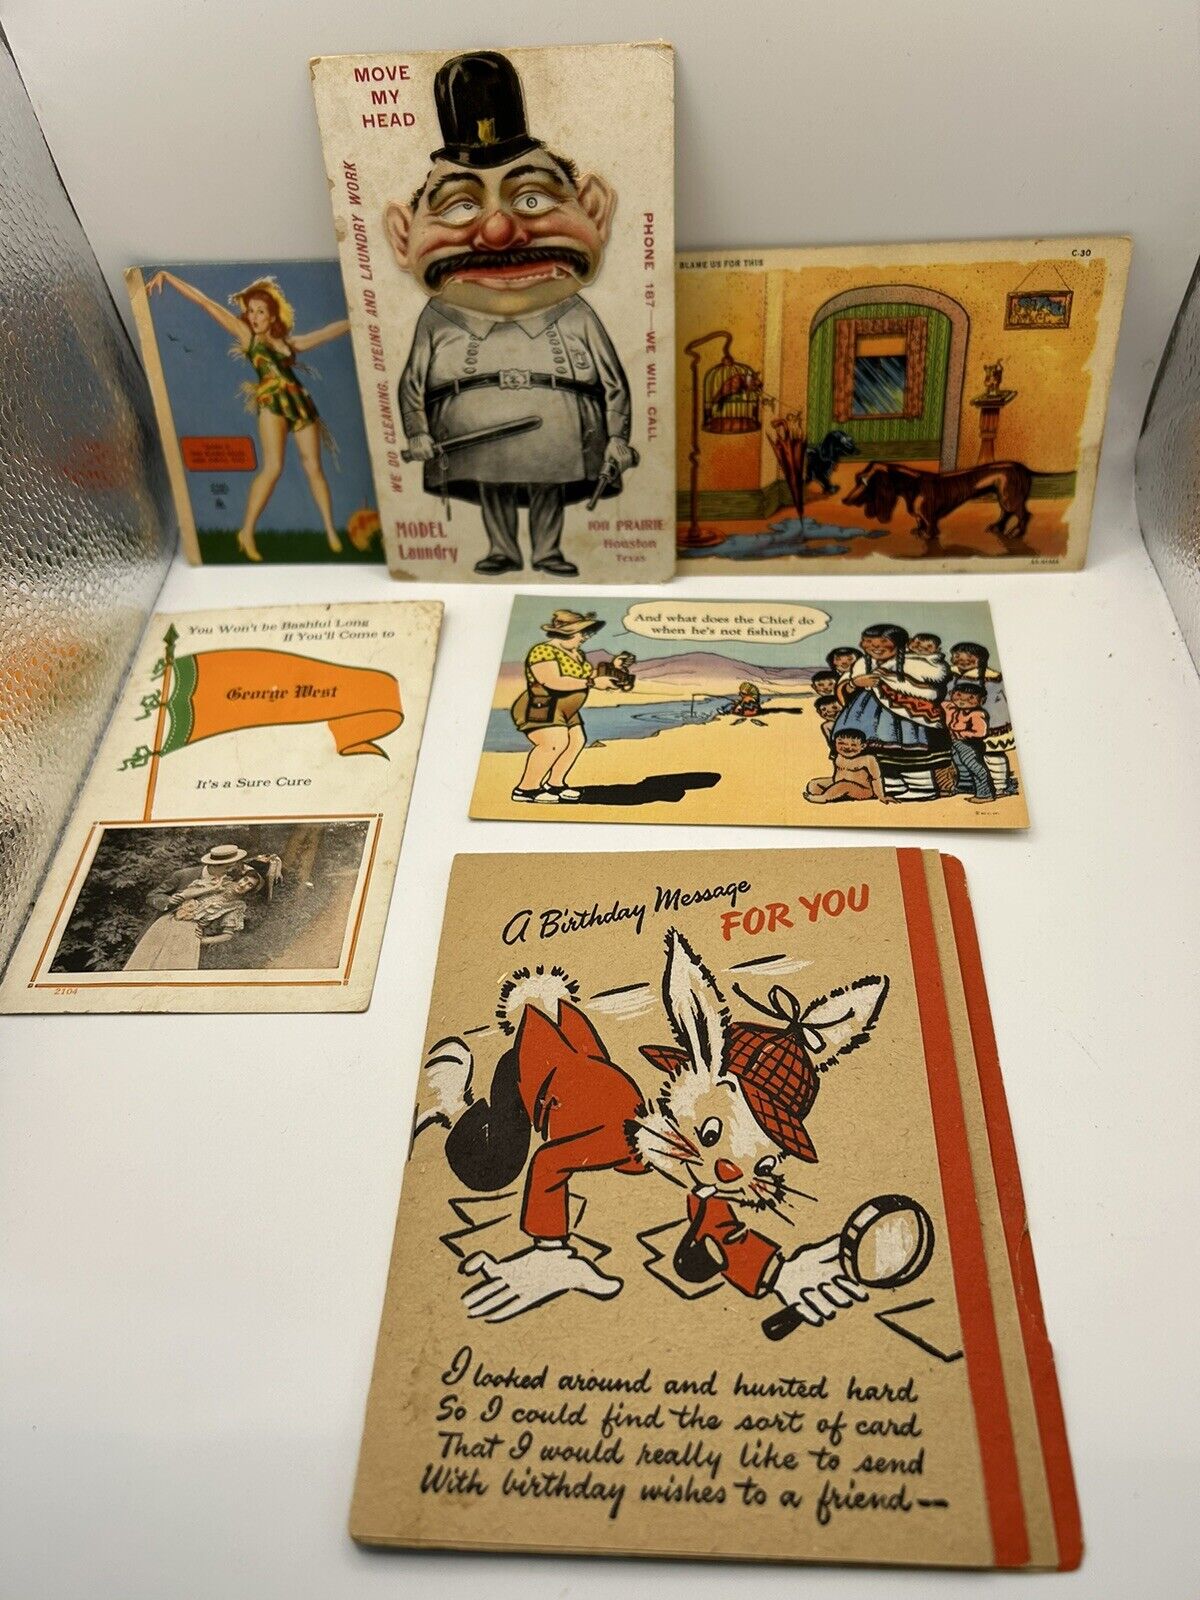 Lot 6 Vtg Silly Postcard Gentle Humor Colorful 1900-1950 FUNNY Moving Head Card